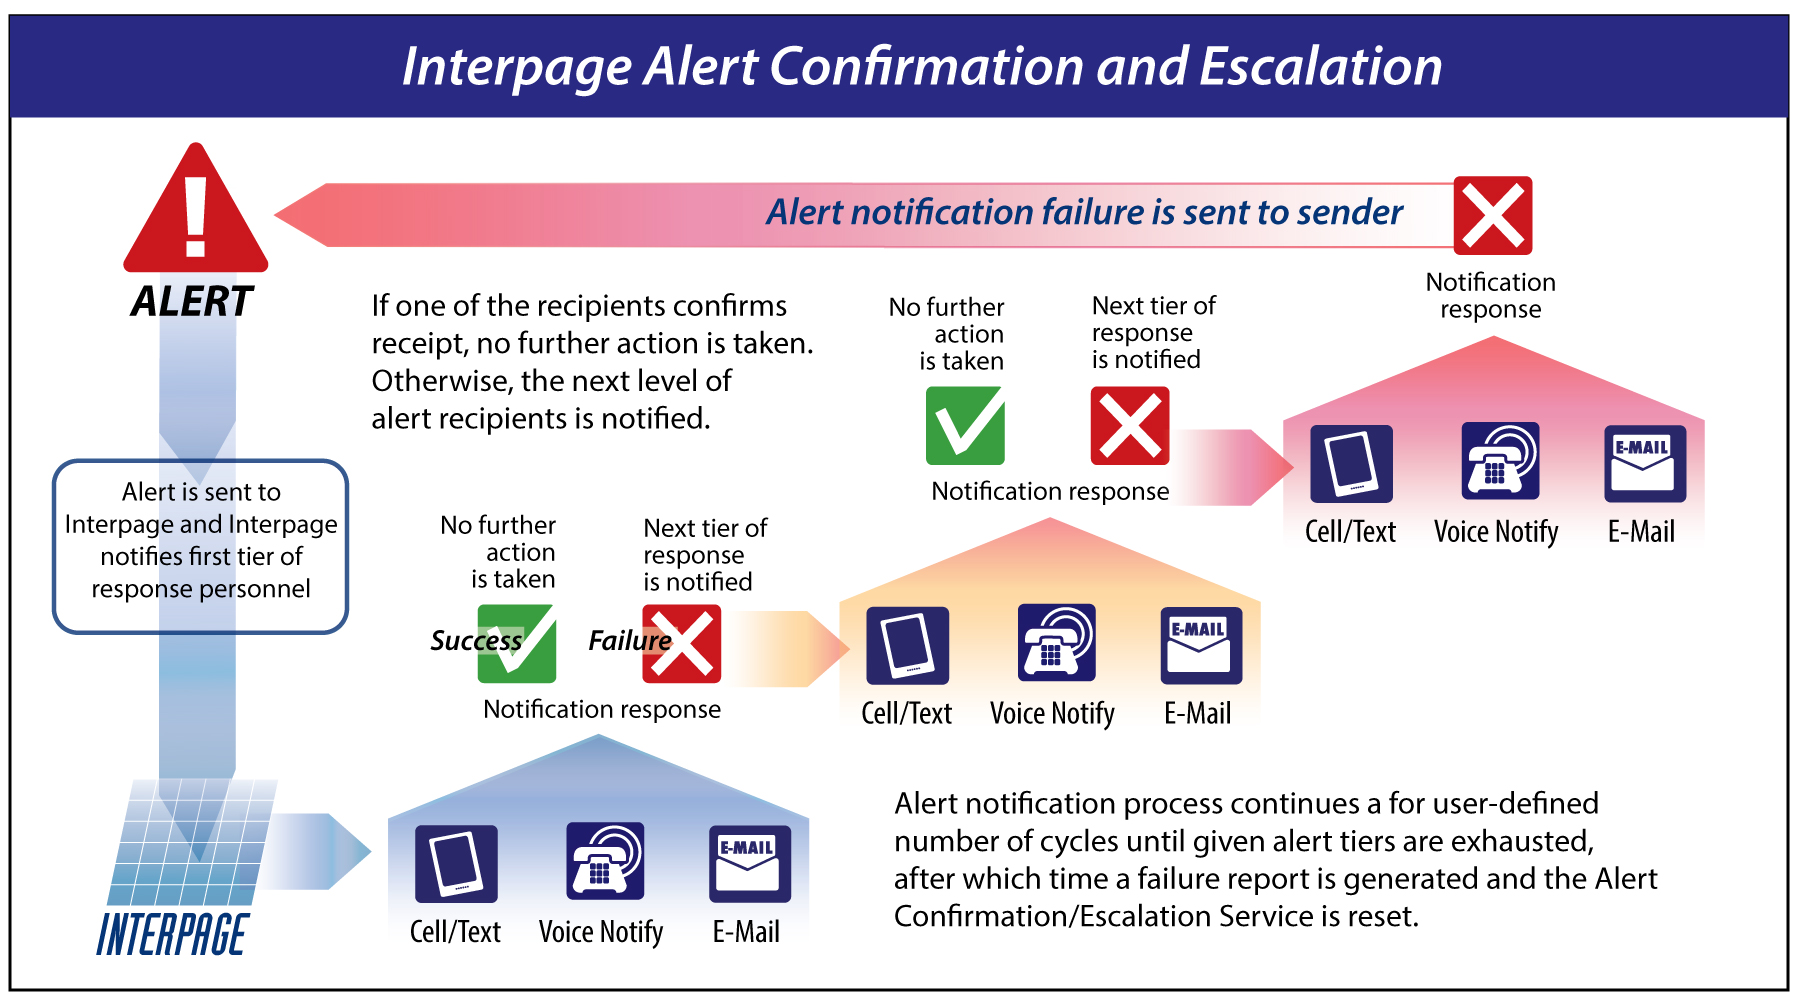 Chart of the Interpage Alert Confirmation and Emergency Escalation Service, showing an alert being issued to one or more devices (SMS/text, pager, voice, e-mail or fax) which requires one or more recipients to confirm receipt. If confirmation isn't received, the Alert/Emergency Escalation Service will notify a second/more senior tier of responders, until confirmation is received, or escalation tiers have been exhausted, in which case a general failure alert is sent